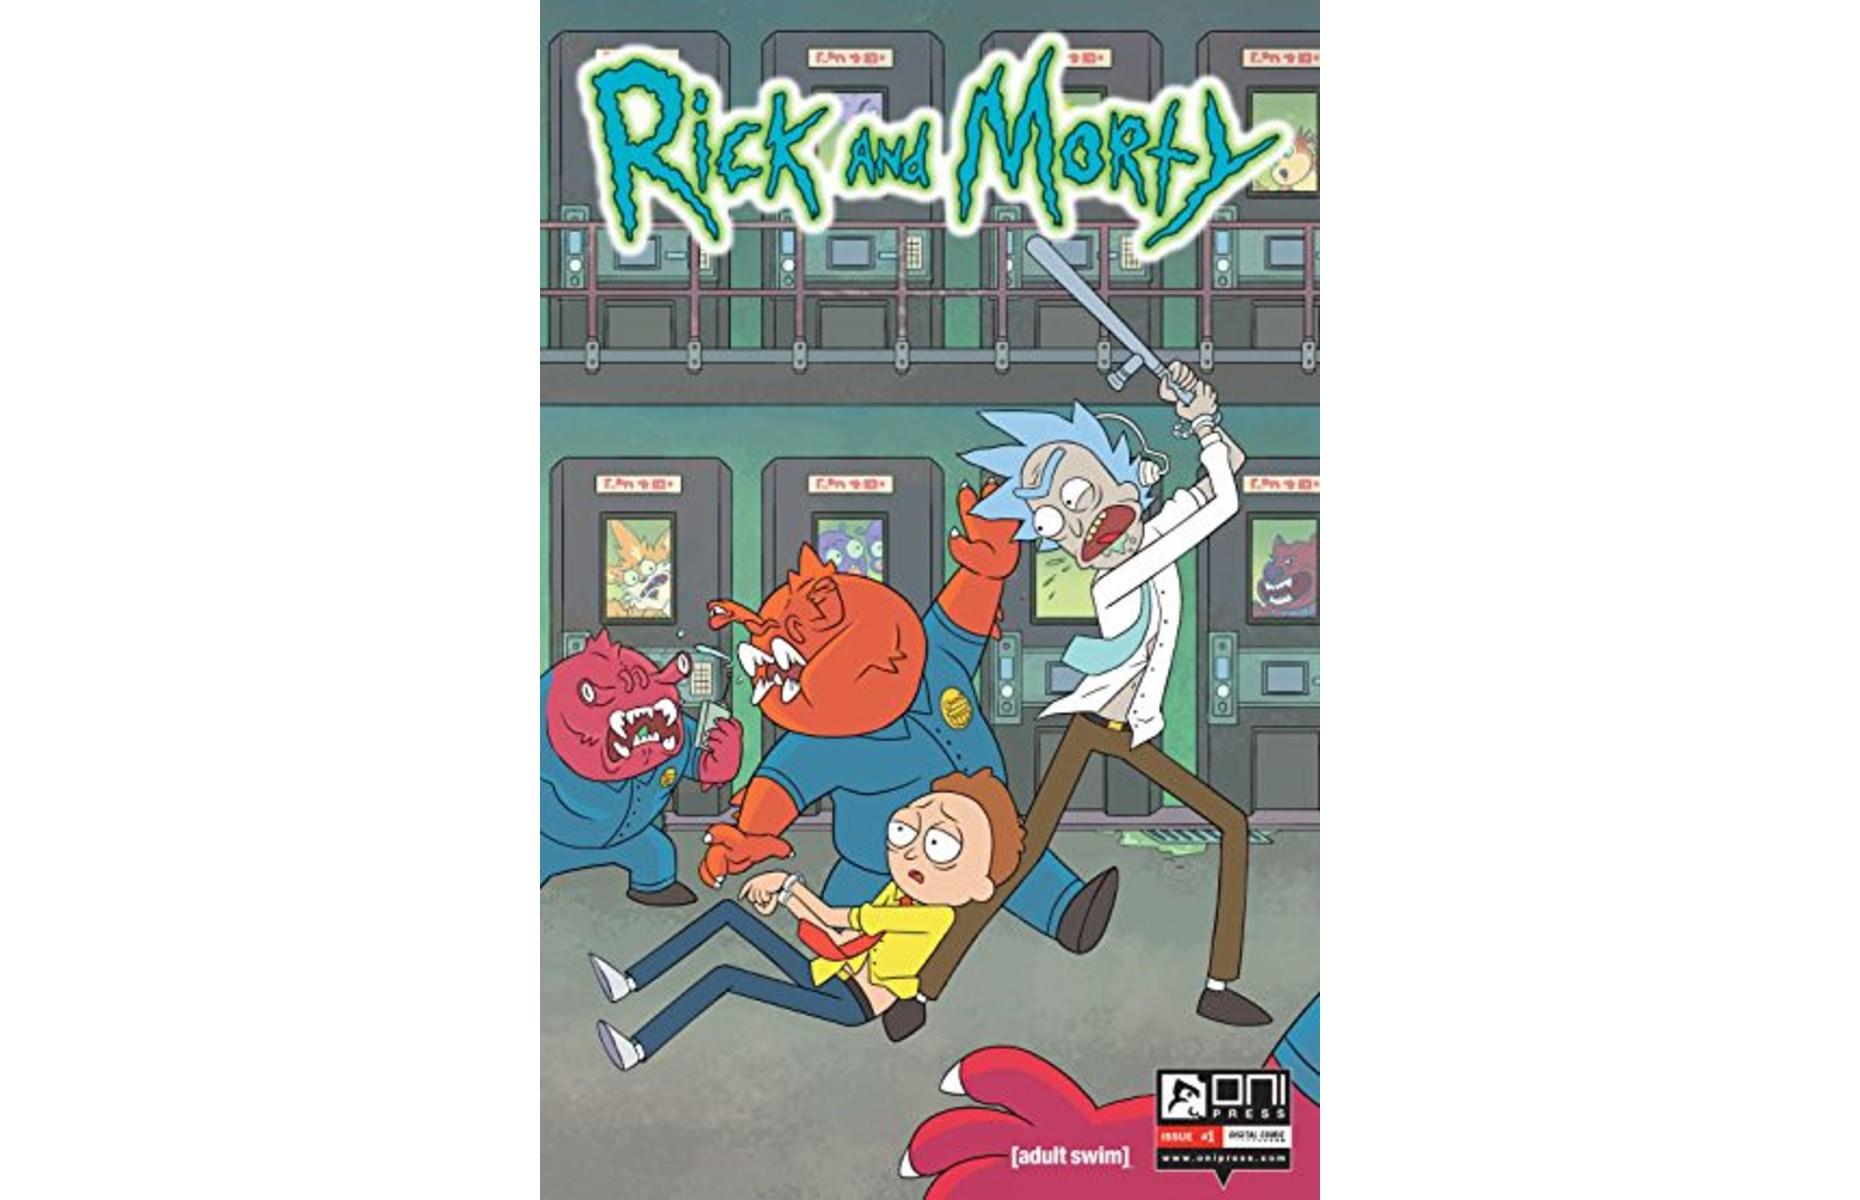 Rick & Morty #1: up to £950 ($1,250)